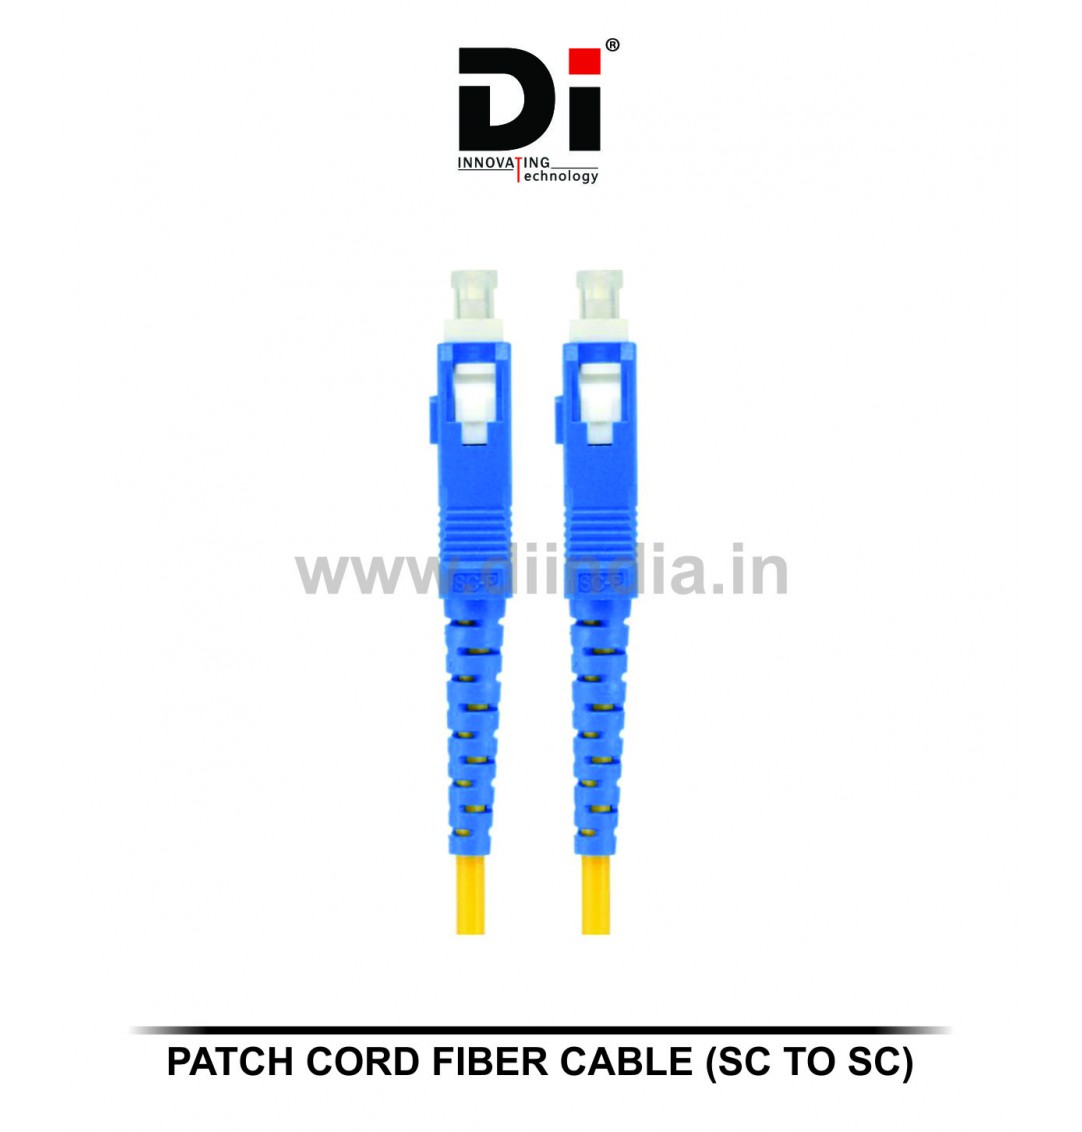 OPTIC FIBER PATCH CORD CABLE  5M (SC TO SC)